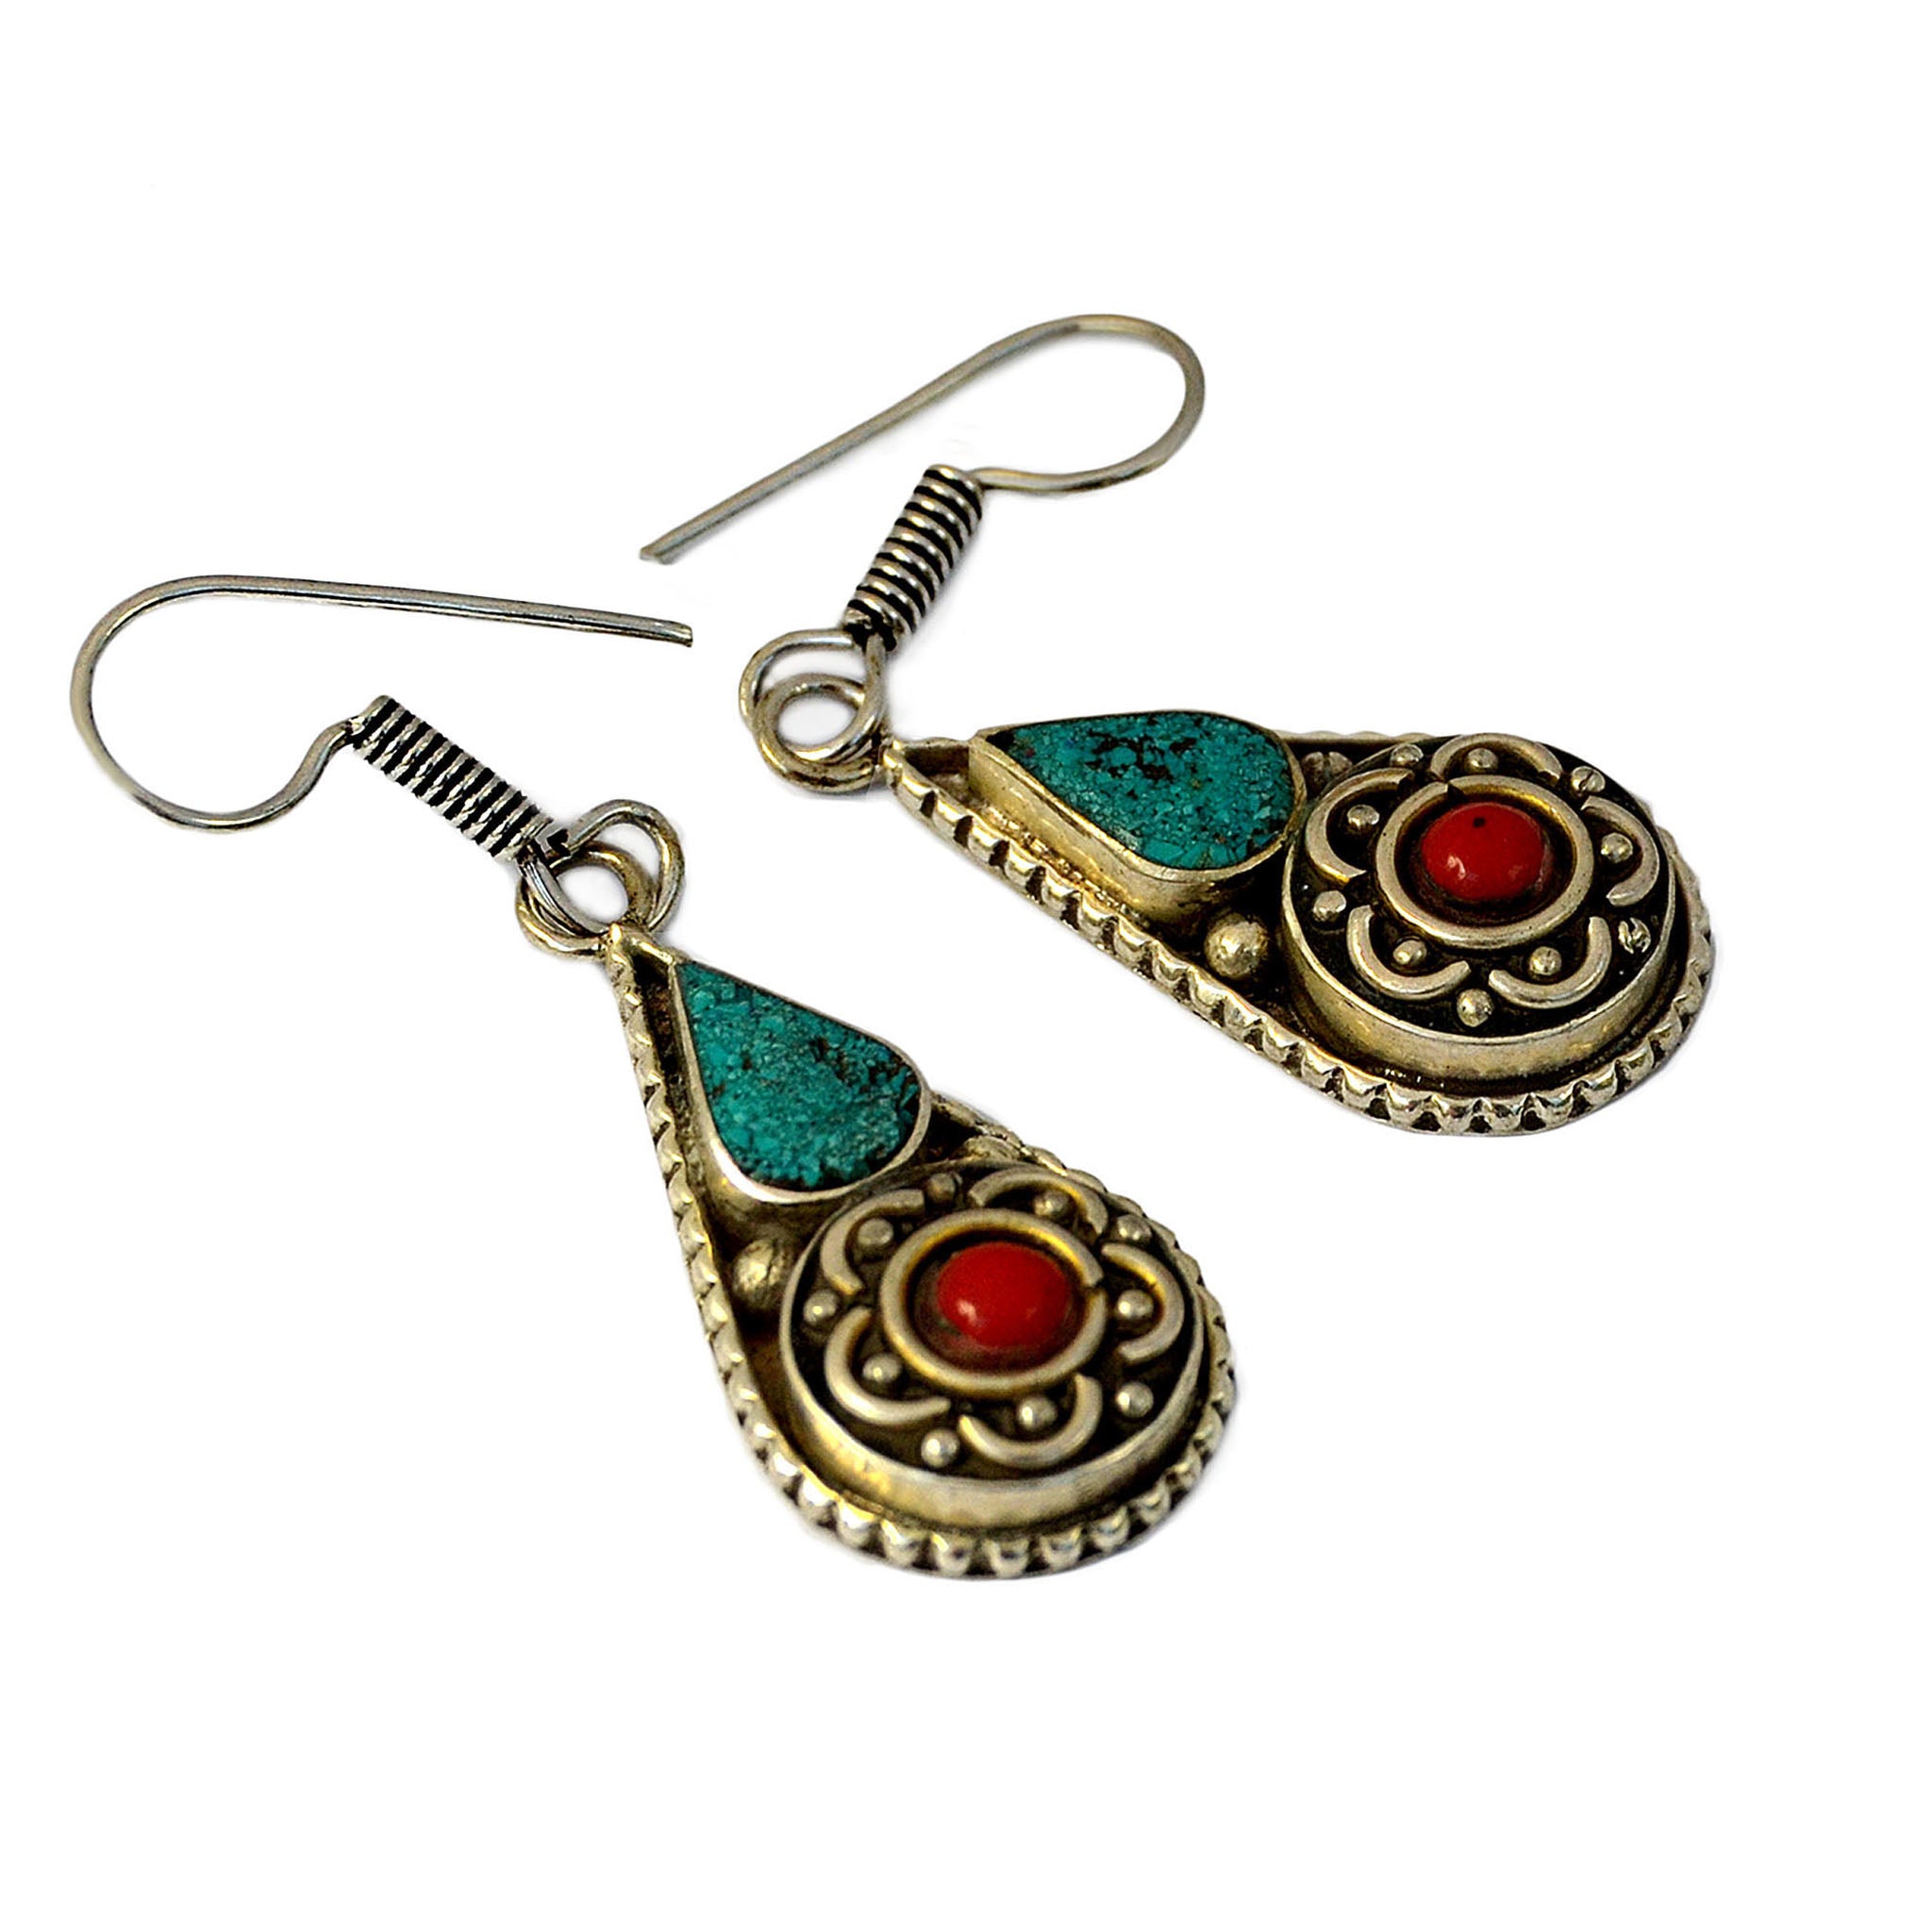 Silver tibetan dangle earrings with inlay turquoise and red coral stones